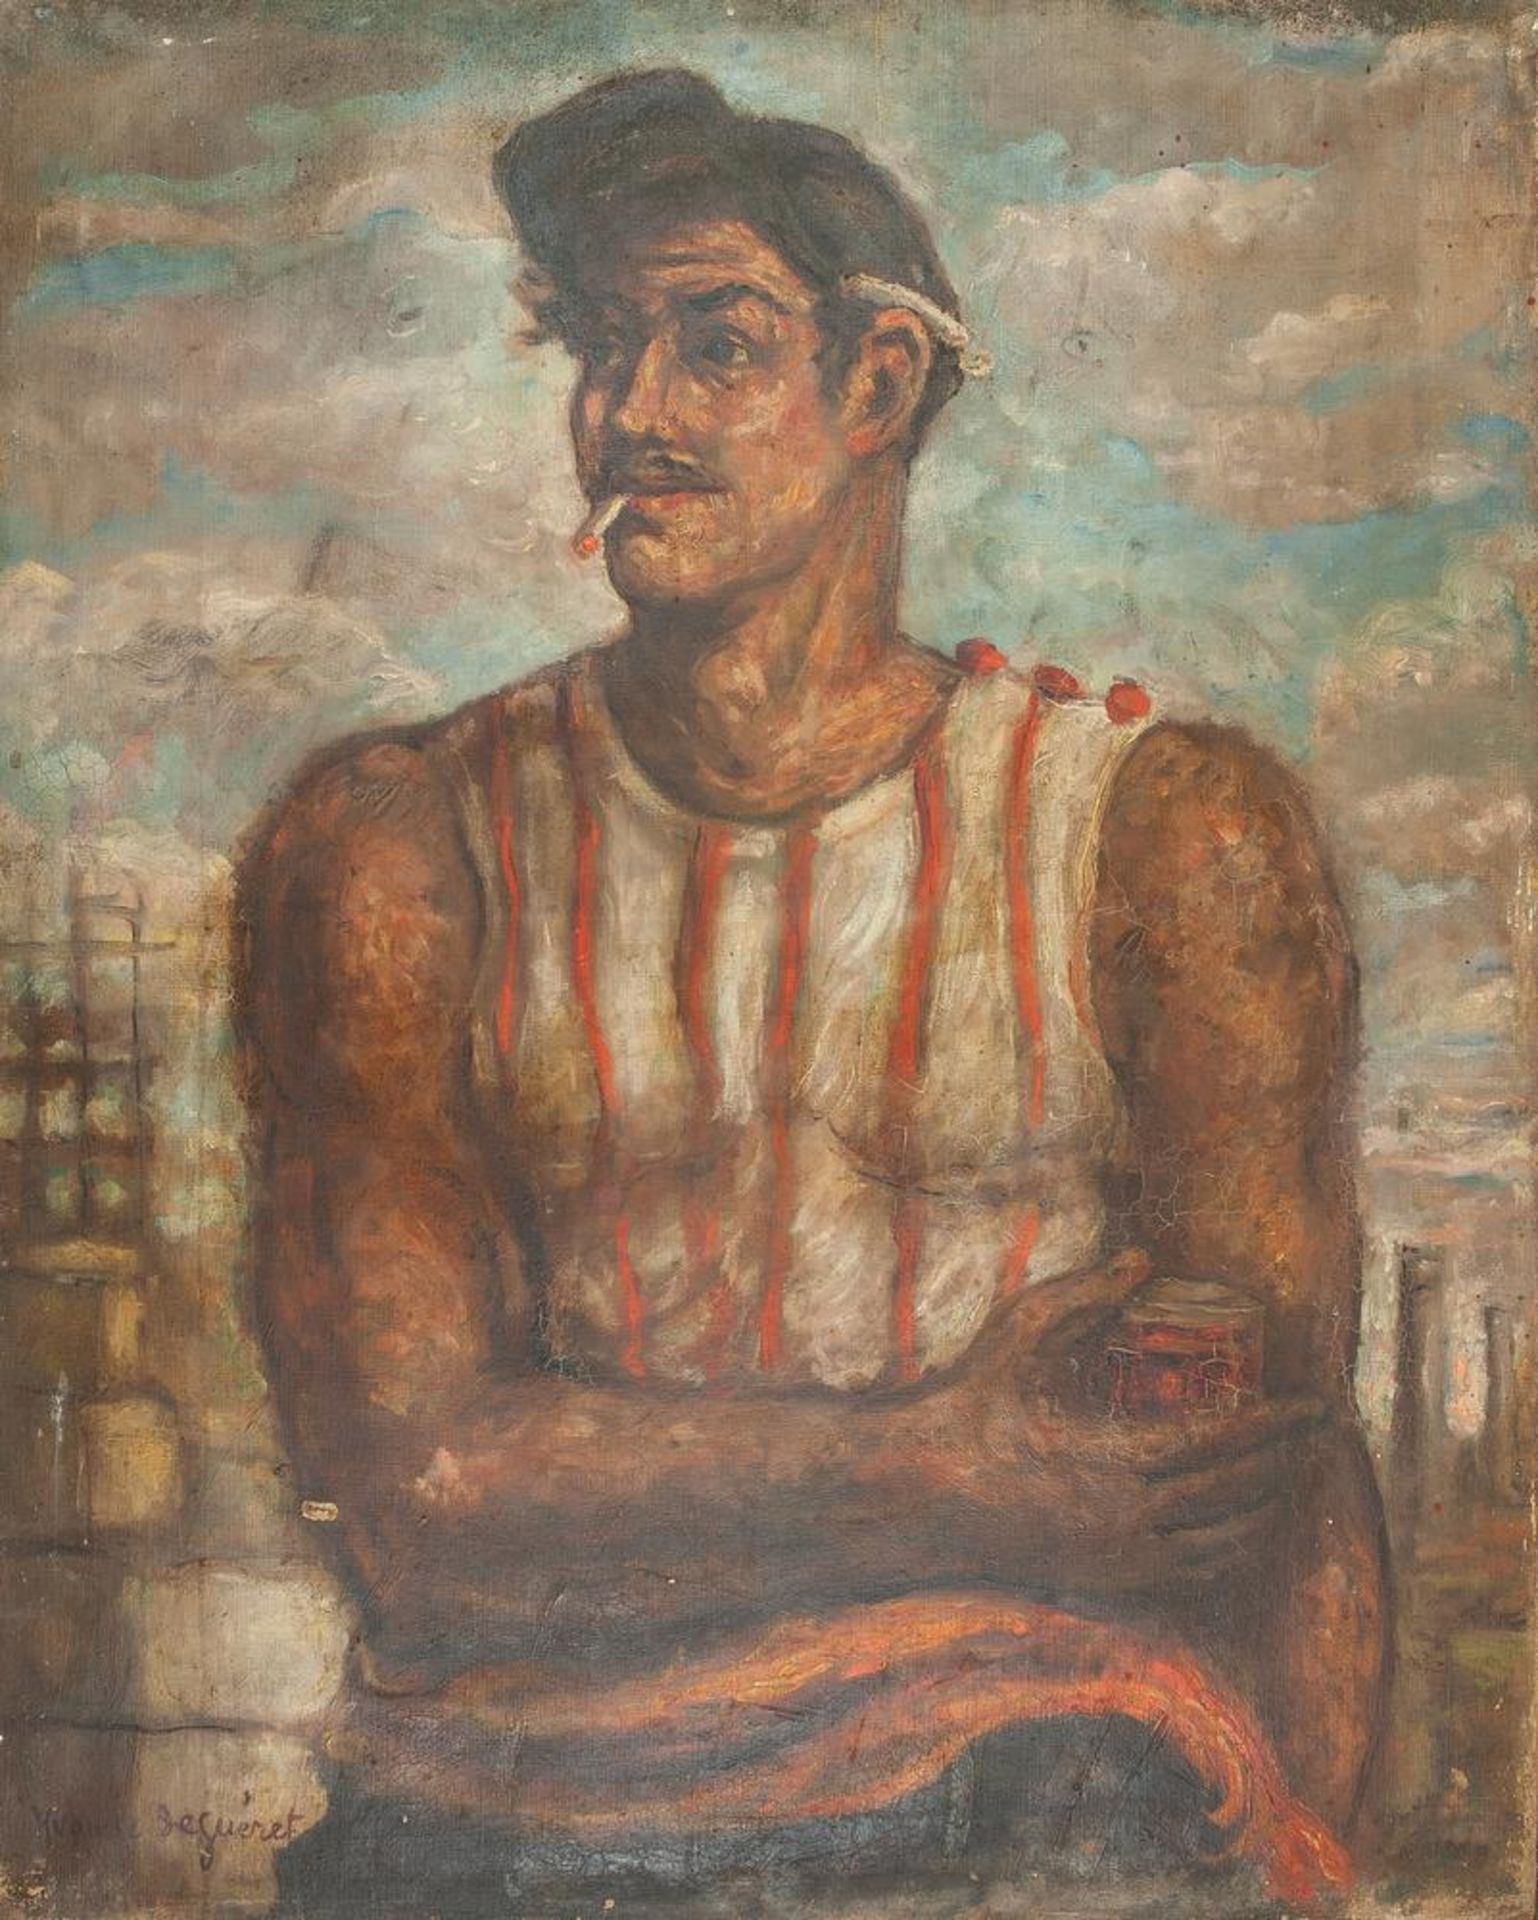 YVONNE DEGUÉRET (XIX-XX) - Builder with a cigarette and coca cola can Signed [...]